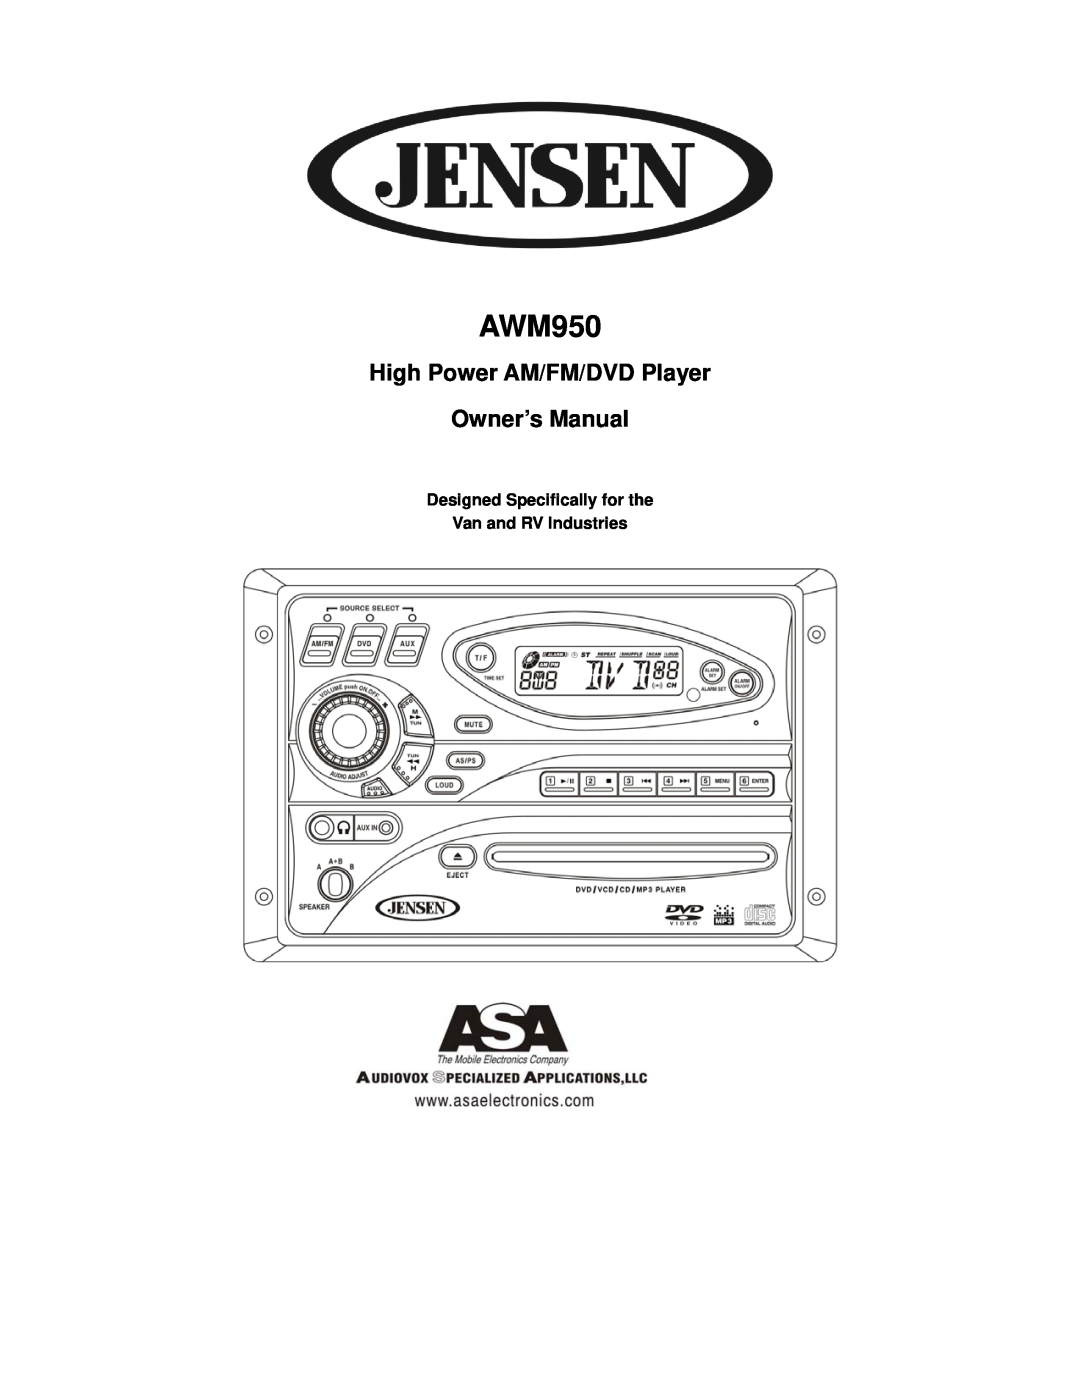 Jensen AWM950 owner manual Designed Specifically for the Van and RV lndustries, High Power AM/FM/DVD Player Owner’s Manual 